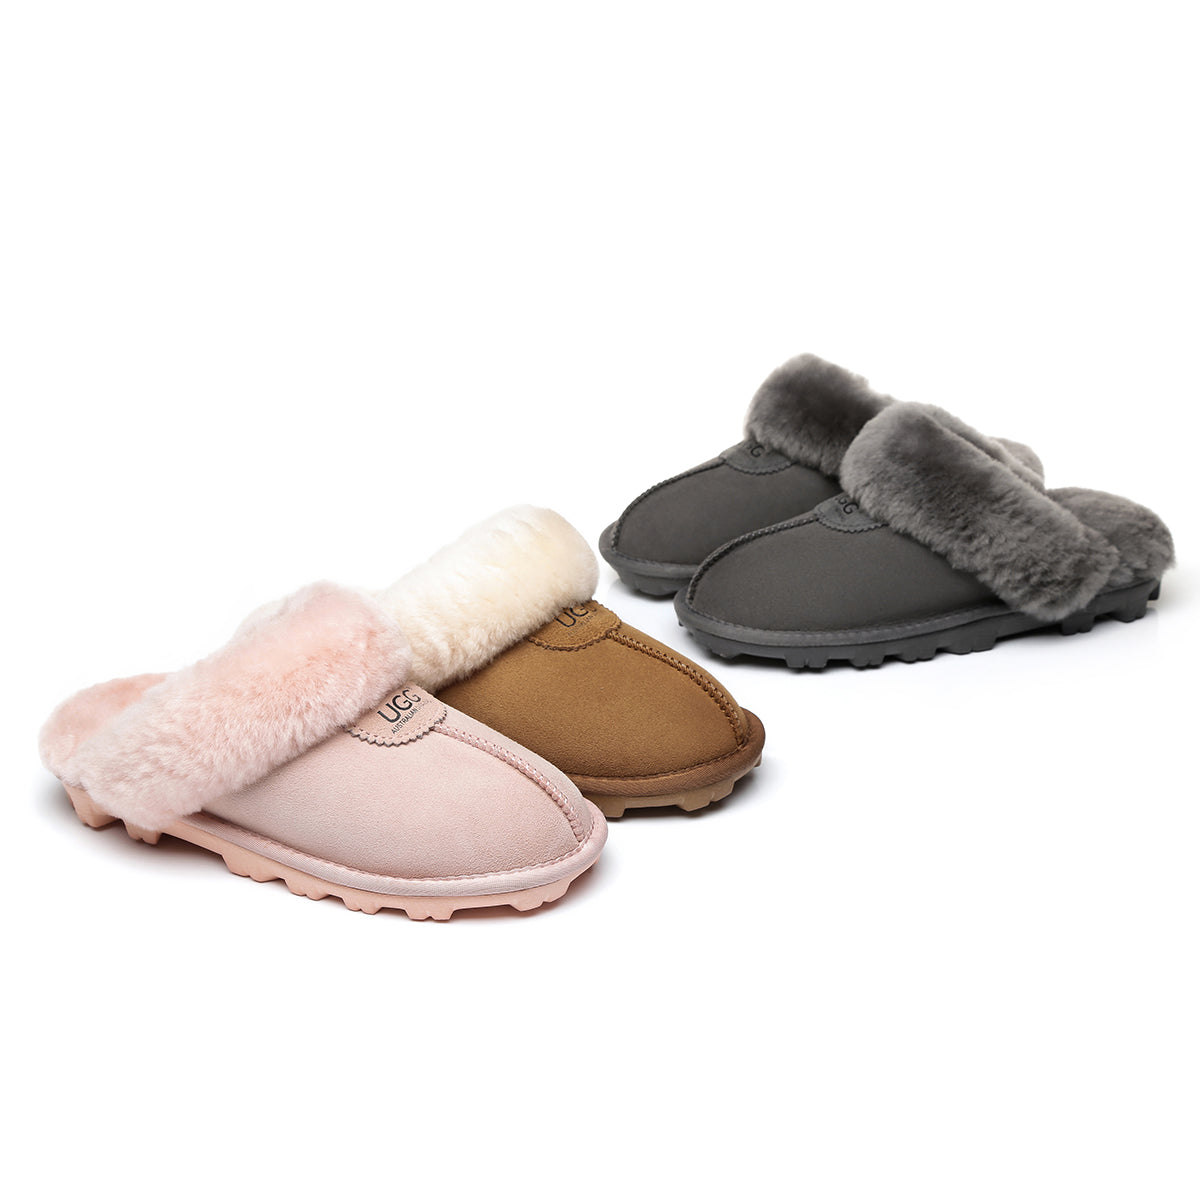 The UGG Store Slippers